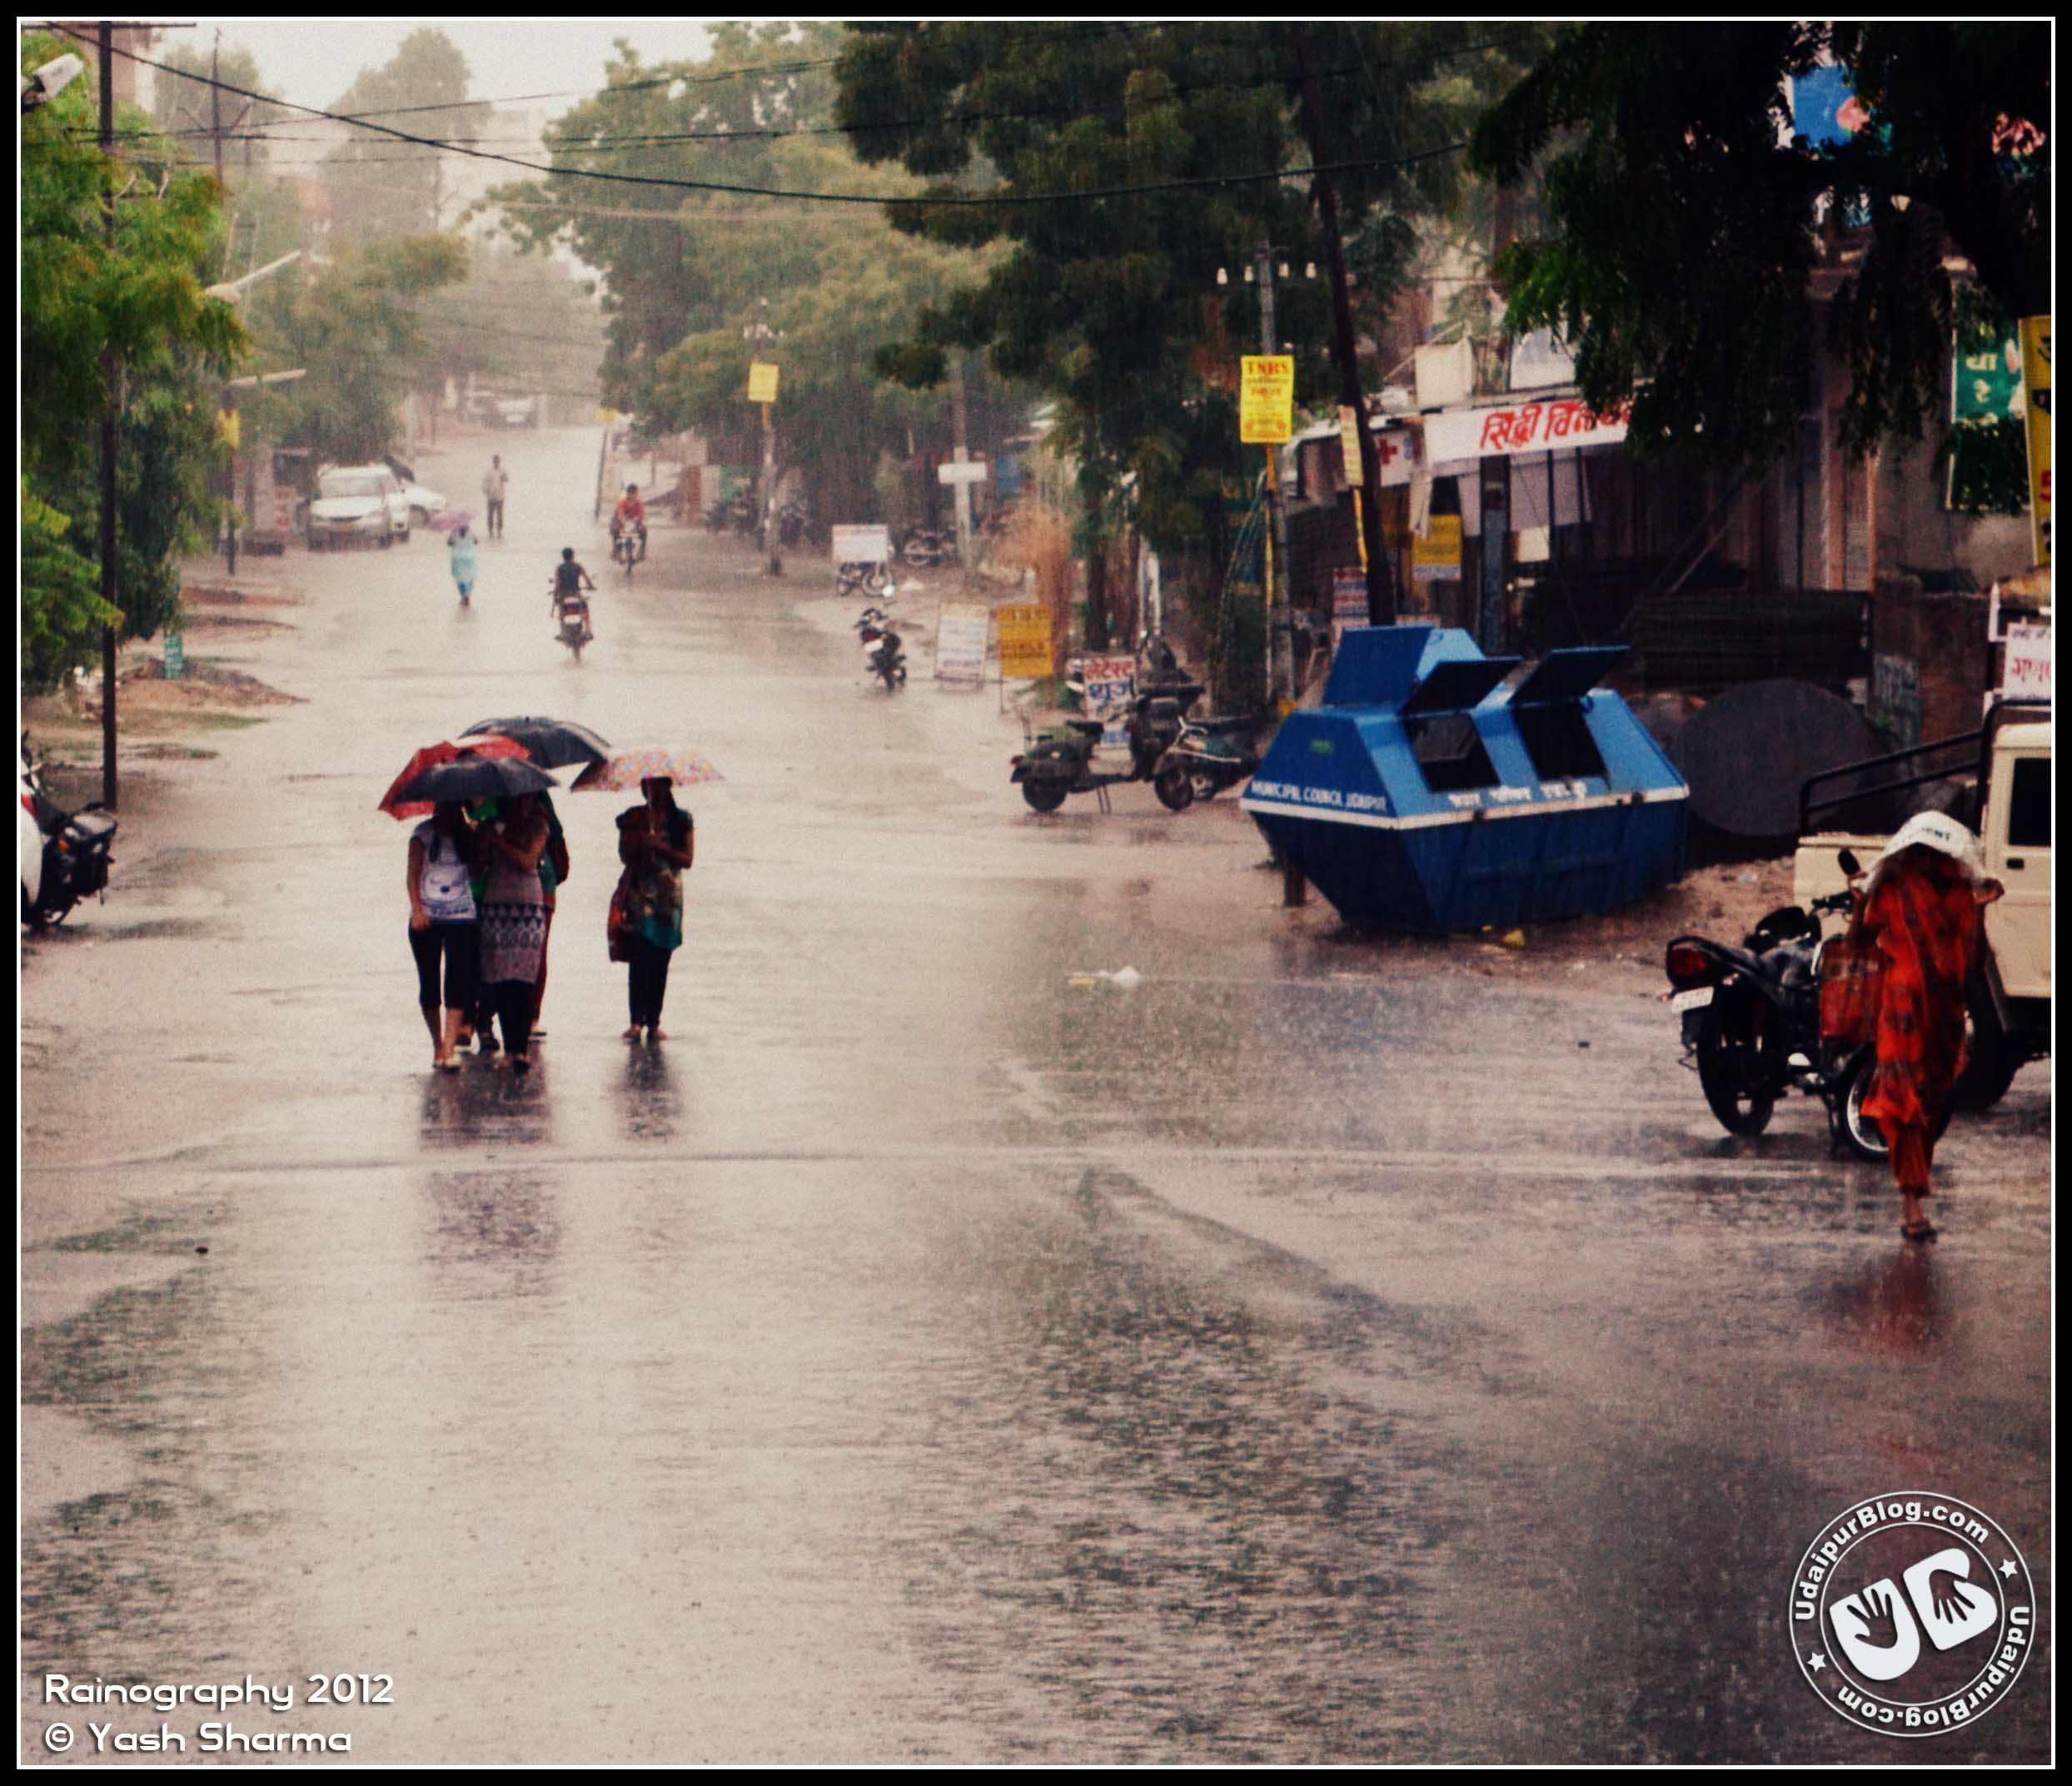 Rainography 2012 – Monsoon finally arrives in Udaipur